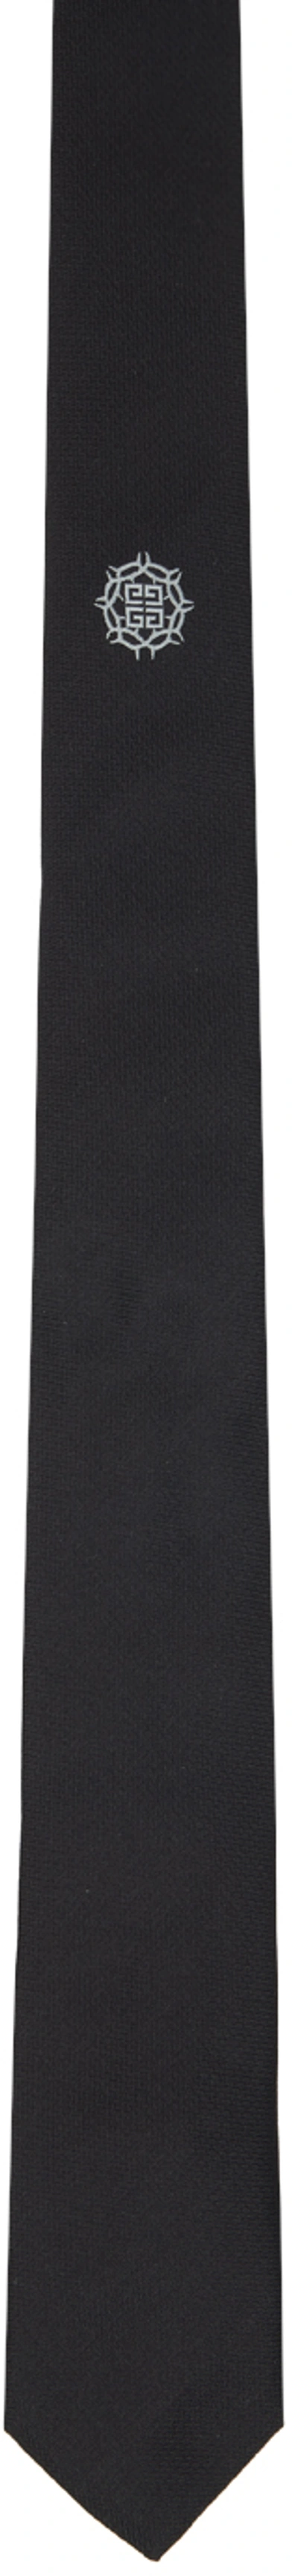 Givenchy Black Embroidered Tie